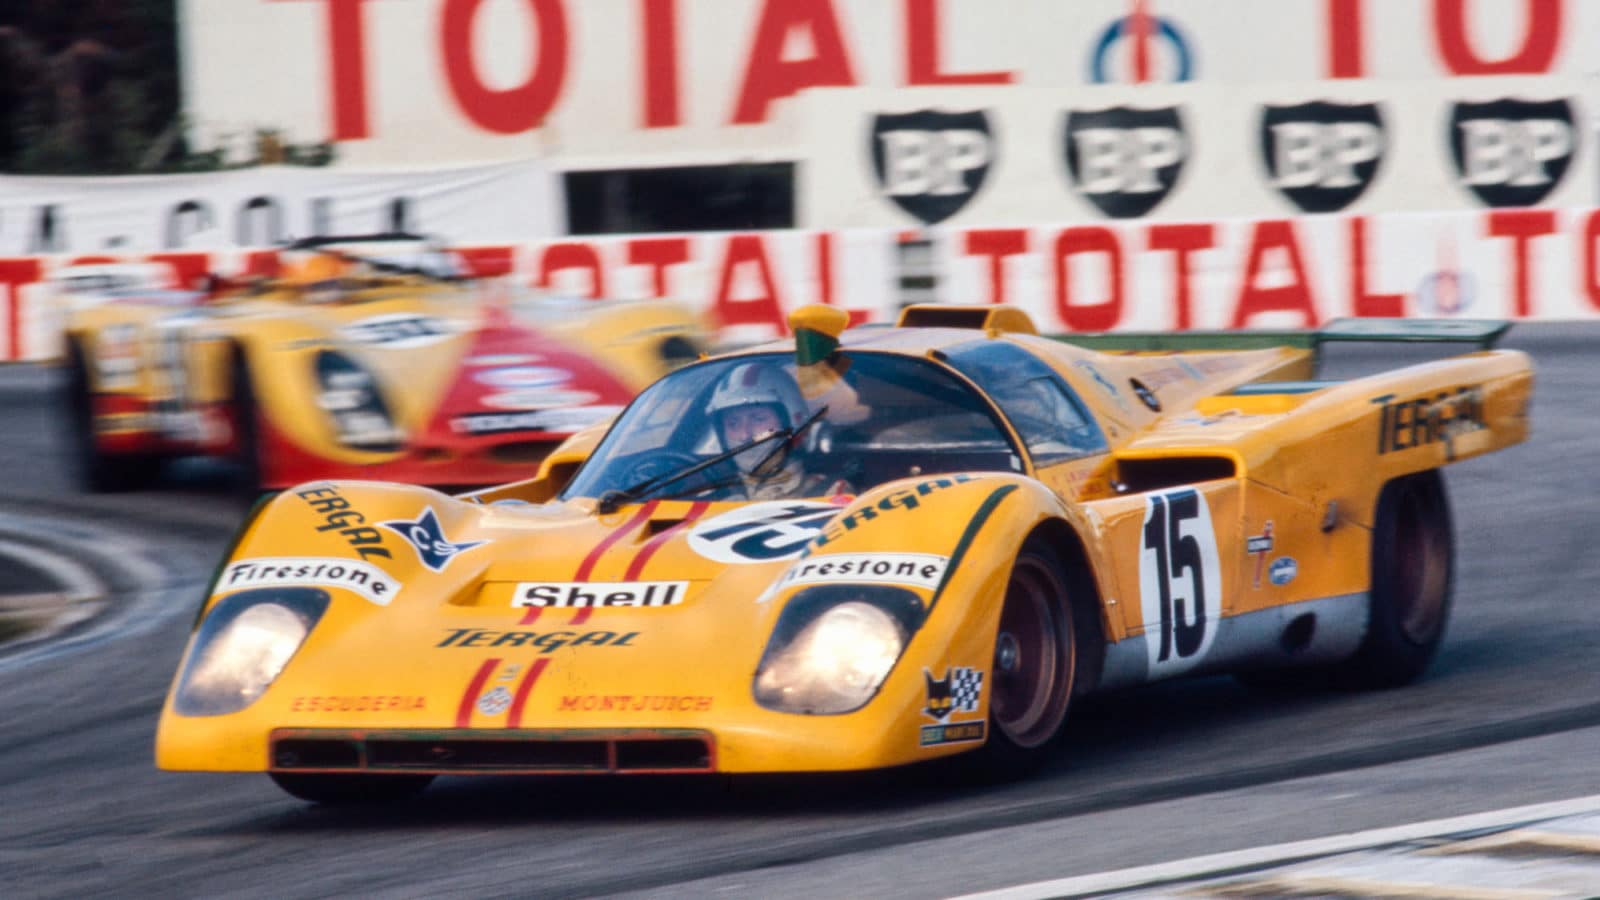 15 Vaccarella Nino (ita), Juncadella José (esp), Escuderia Montjuich, Ferrari 512 M , action during the 24 Heures du Mans, 24 Hours of Le Mans, 9th Round of the International Championship for Makes, on the Circuit de la Sarthe, from June 9 to 13, 1971 in Le Mans, Sarthe, France - Photo 15 Vaccarella Nino (ita), Juncadella José (esp), Escuderia Montjuich, Ferrari 512 M , action during the 24 Heures du Mans, 24 Hours of Le Mans, 9th Round of the International Championship for Makes, on the Circuit de la Sarthe, from June 9 to 13, 1971 in Le Mans, Sarthe, France - Photo DPPI